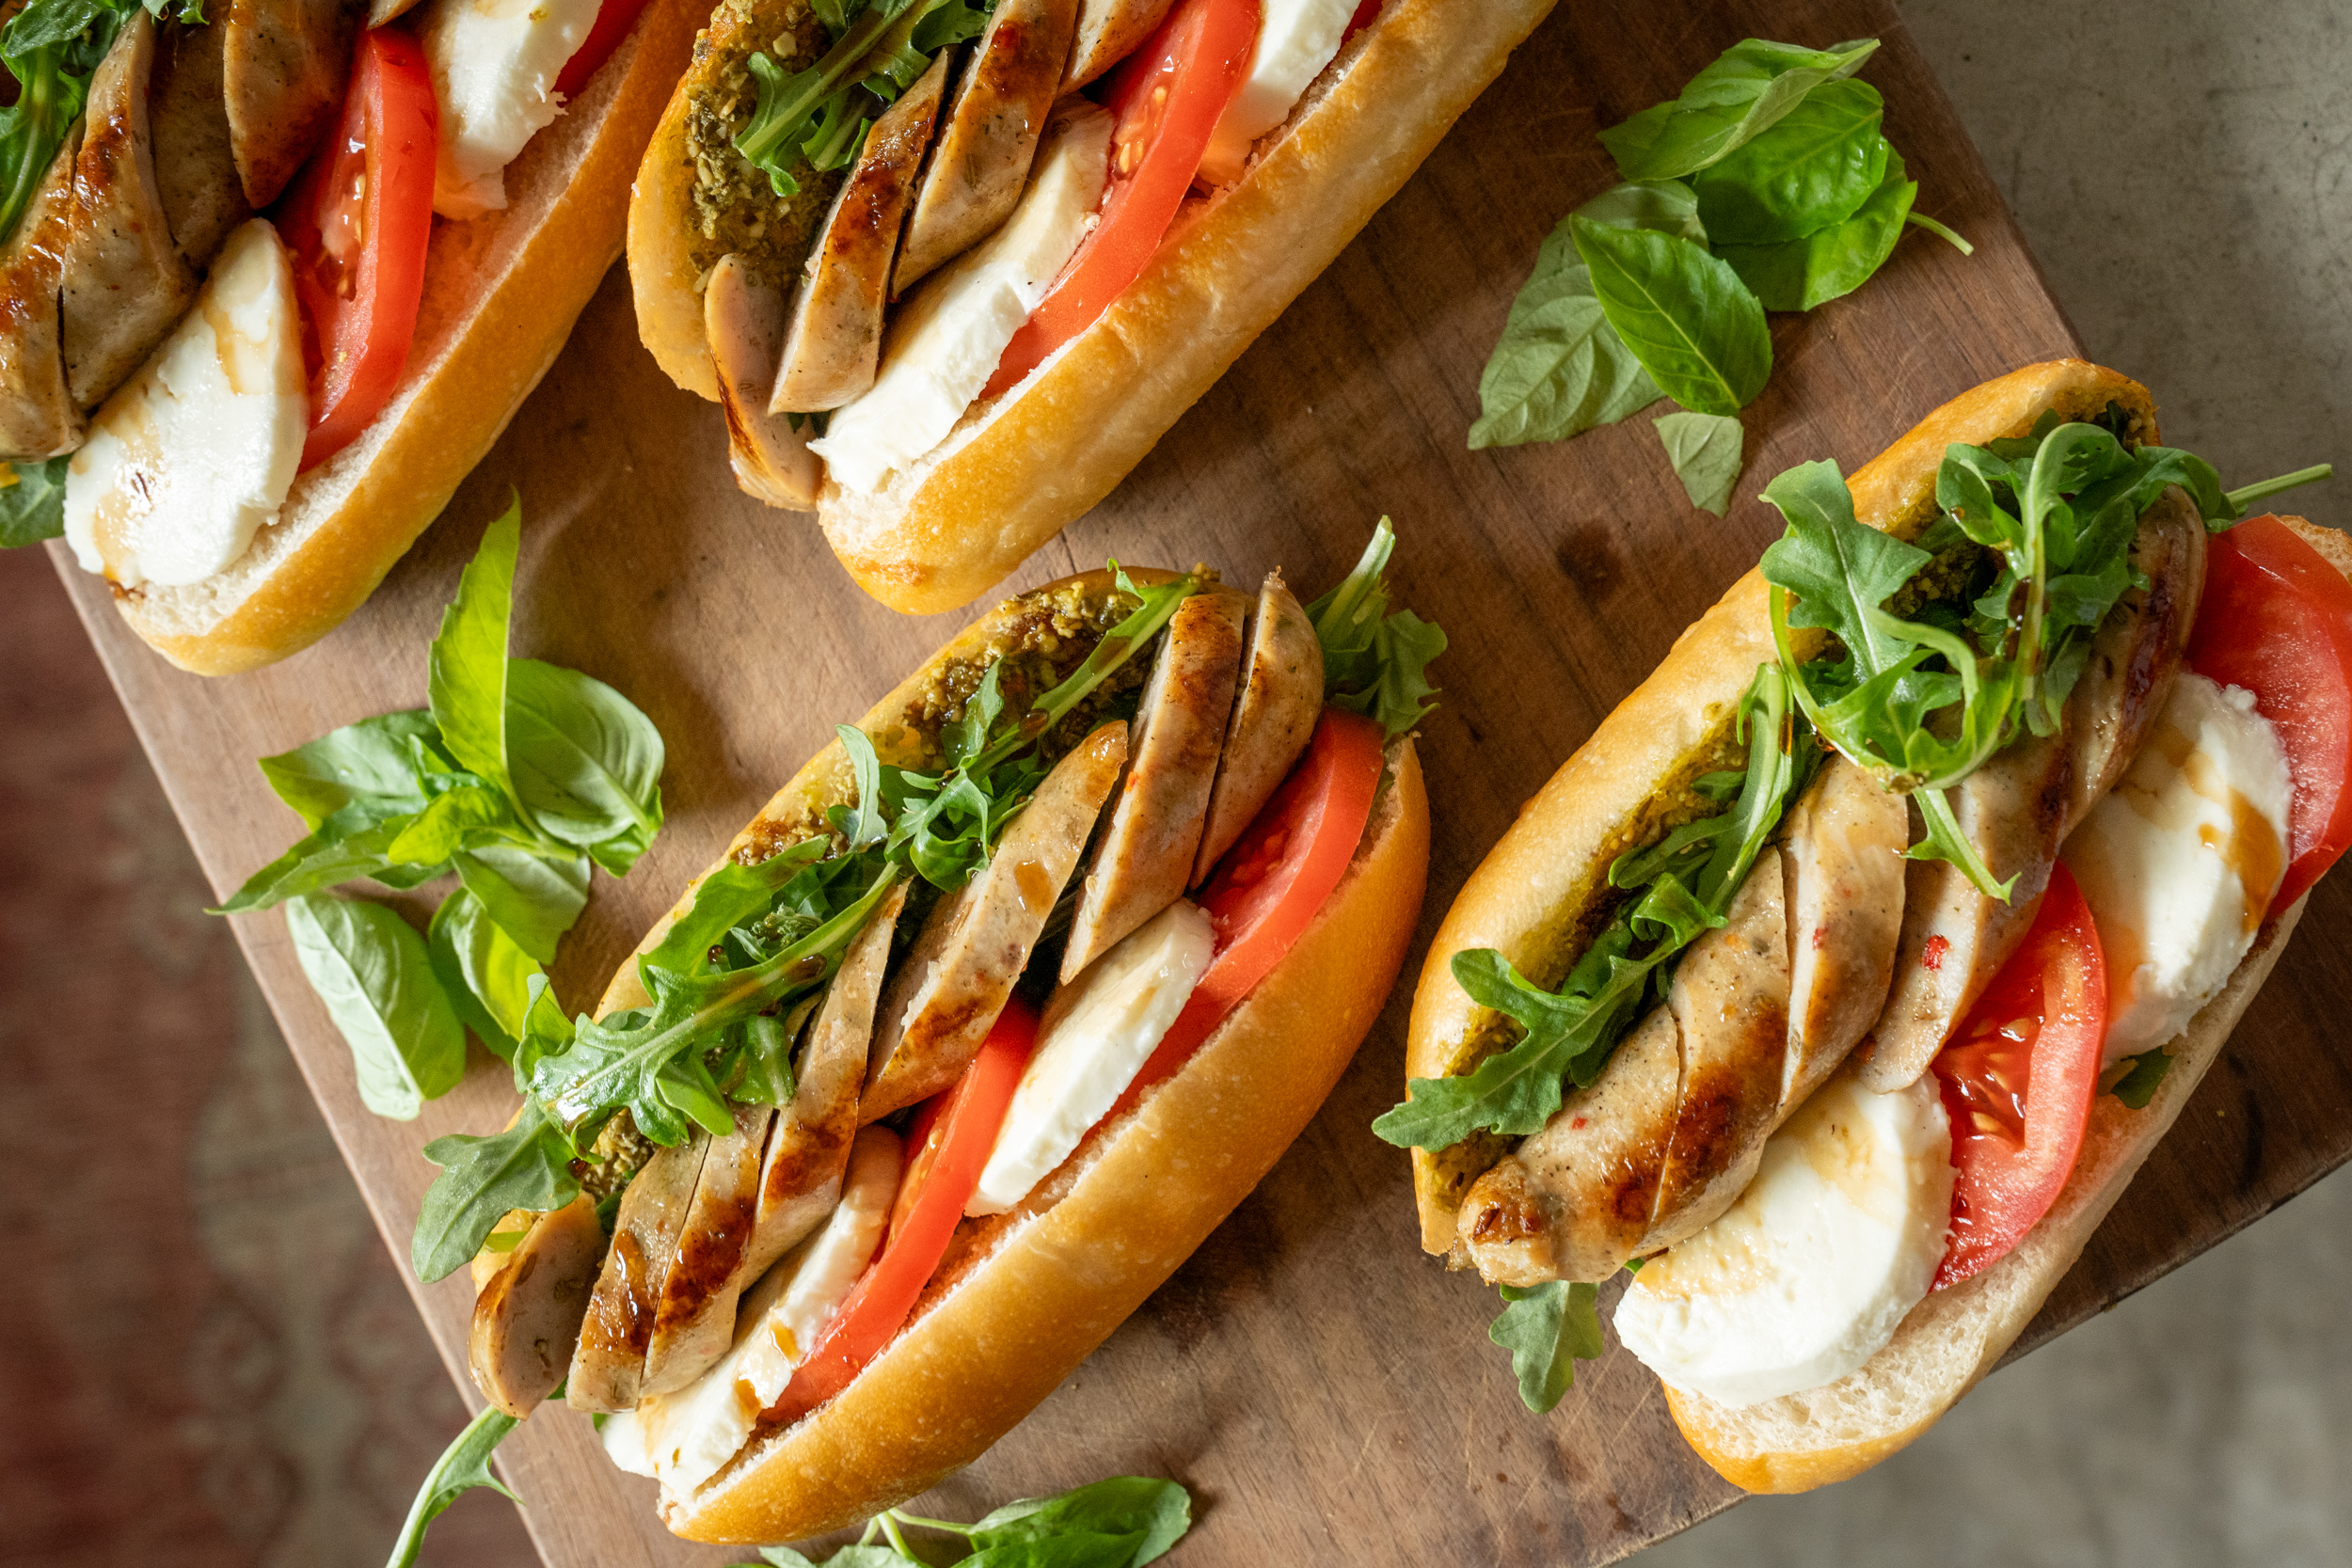 four hoagie sandwich rolls filled with sliced chicken sausage, tomatoes, fresh basil and mozzarella